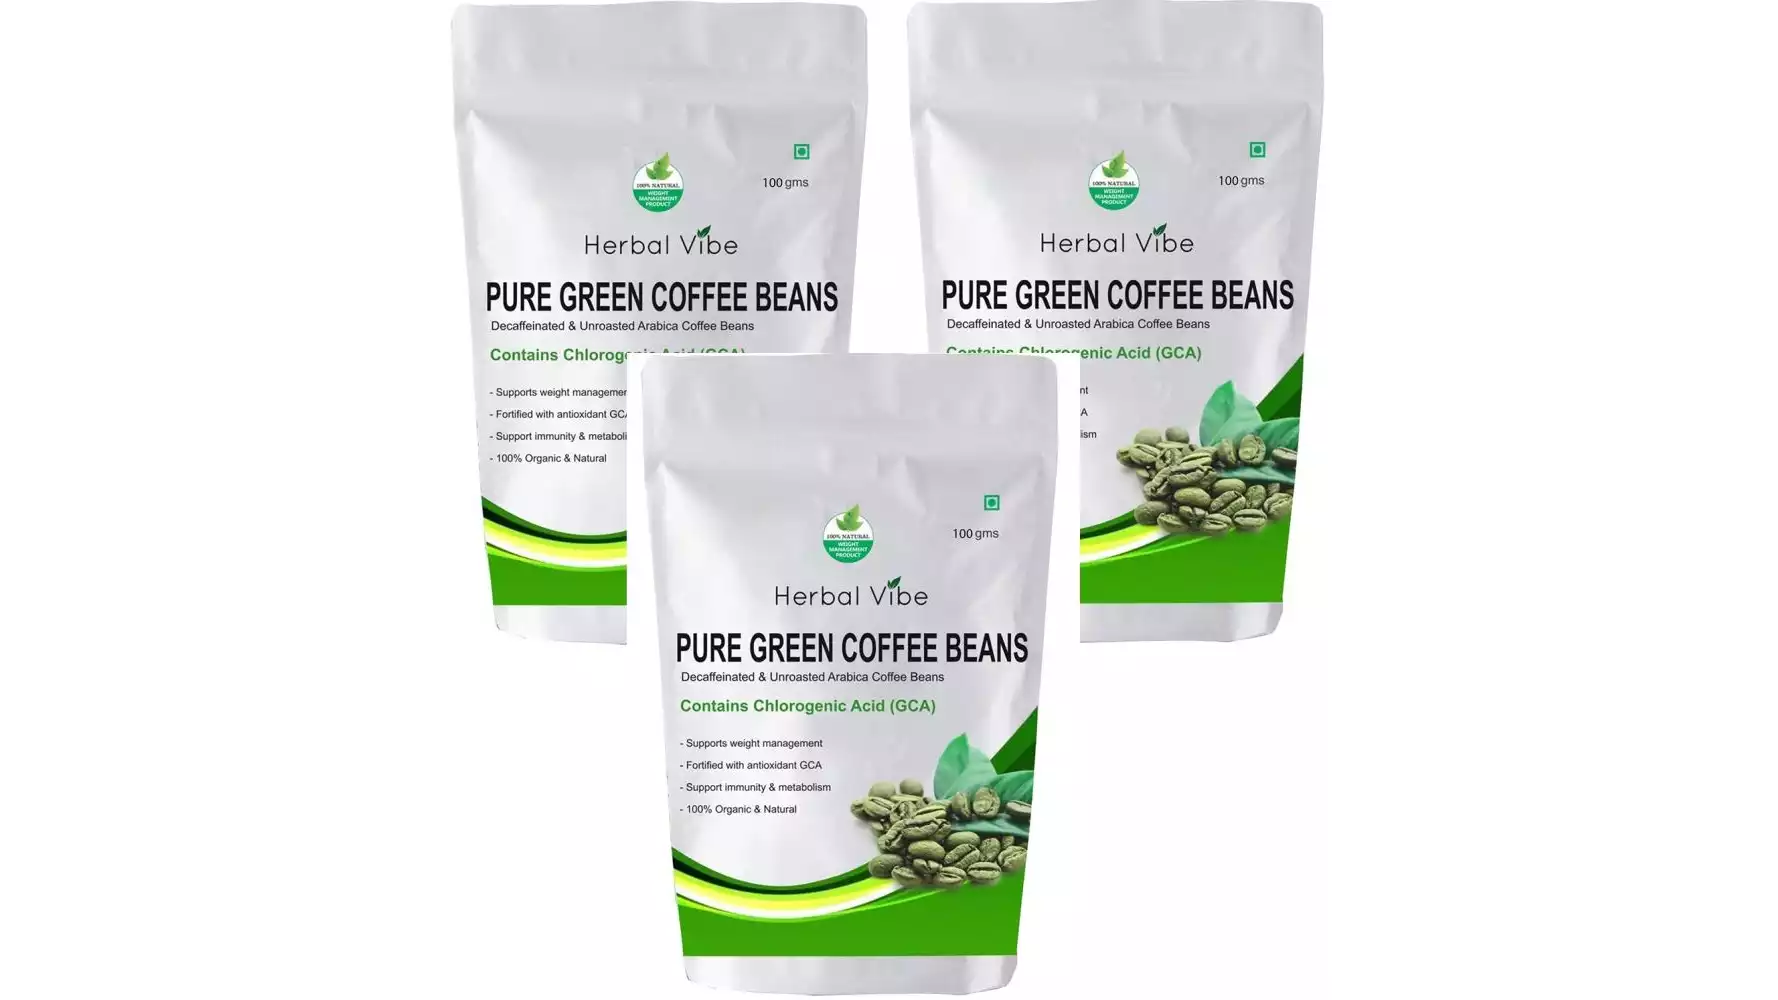 Herbal Vibe Pure Green Coffee Beans For Weight Loss (100g, Pack of 3)